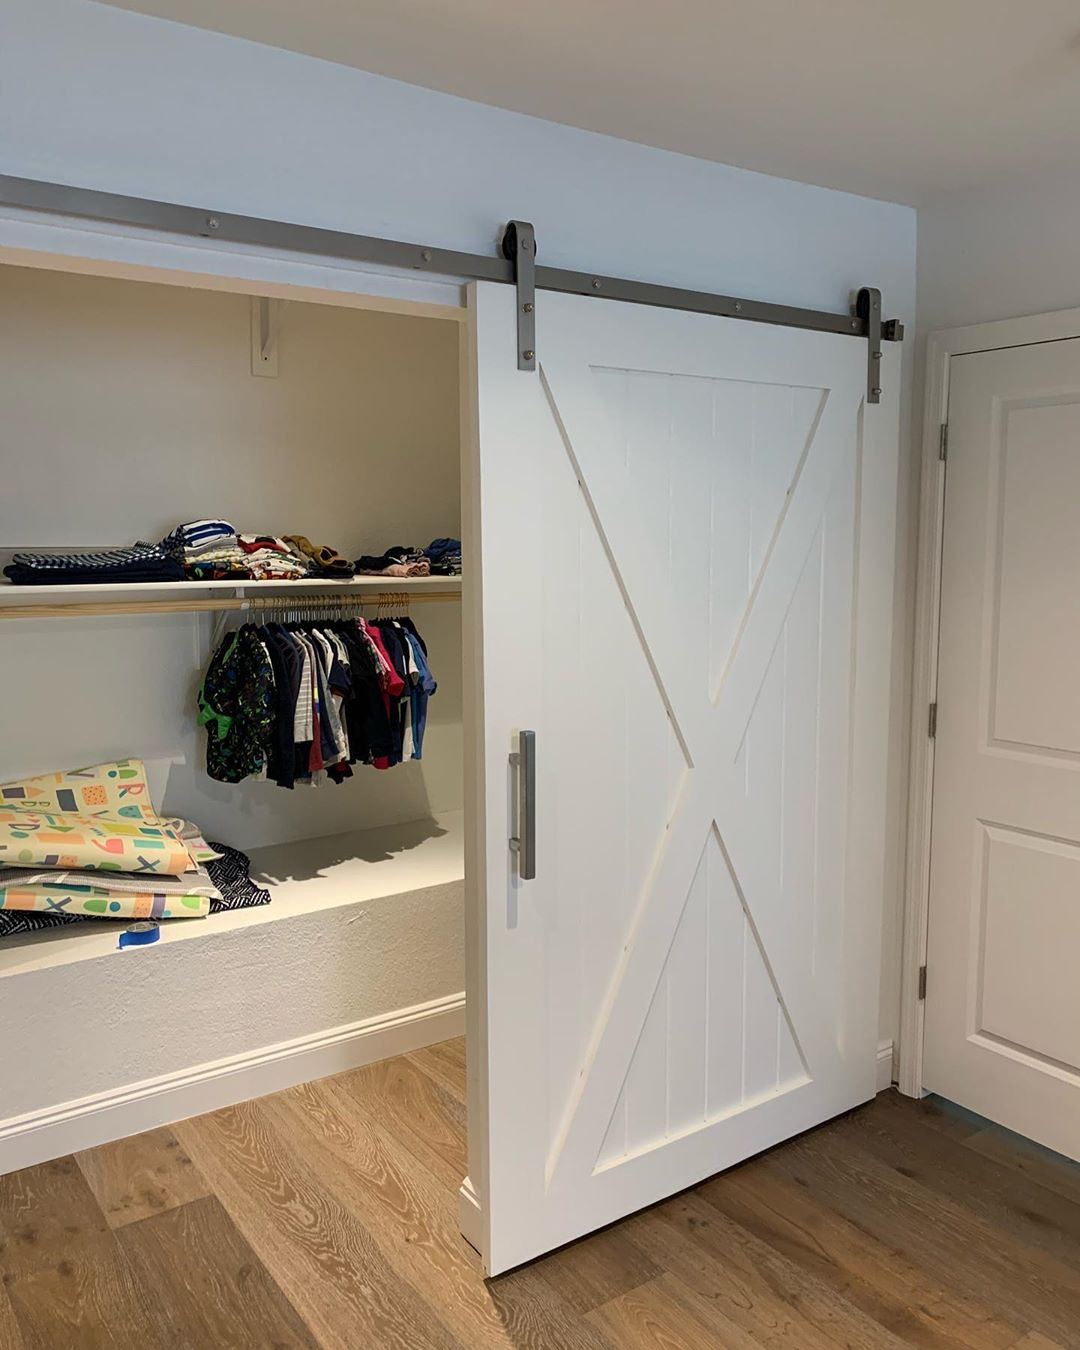 36 Best Closet Door ideas You Need to Try 2020,sliding closet door ideas,closet door ideas diy,closet door ideas for large openings